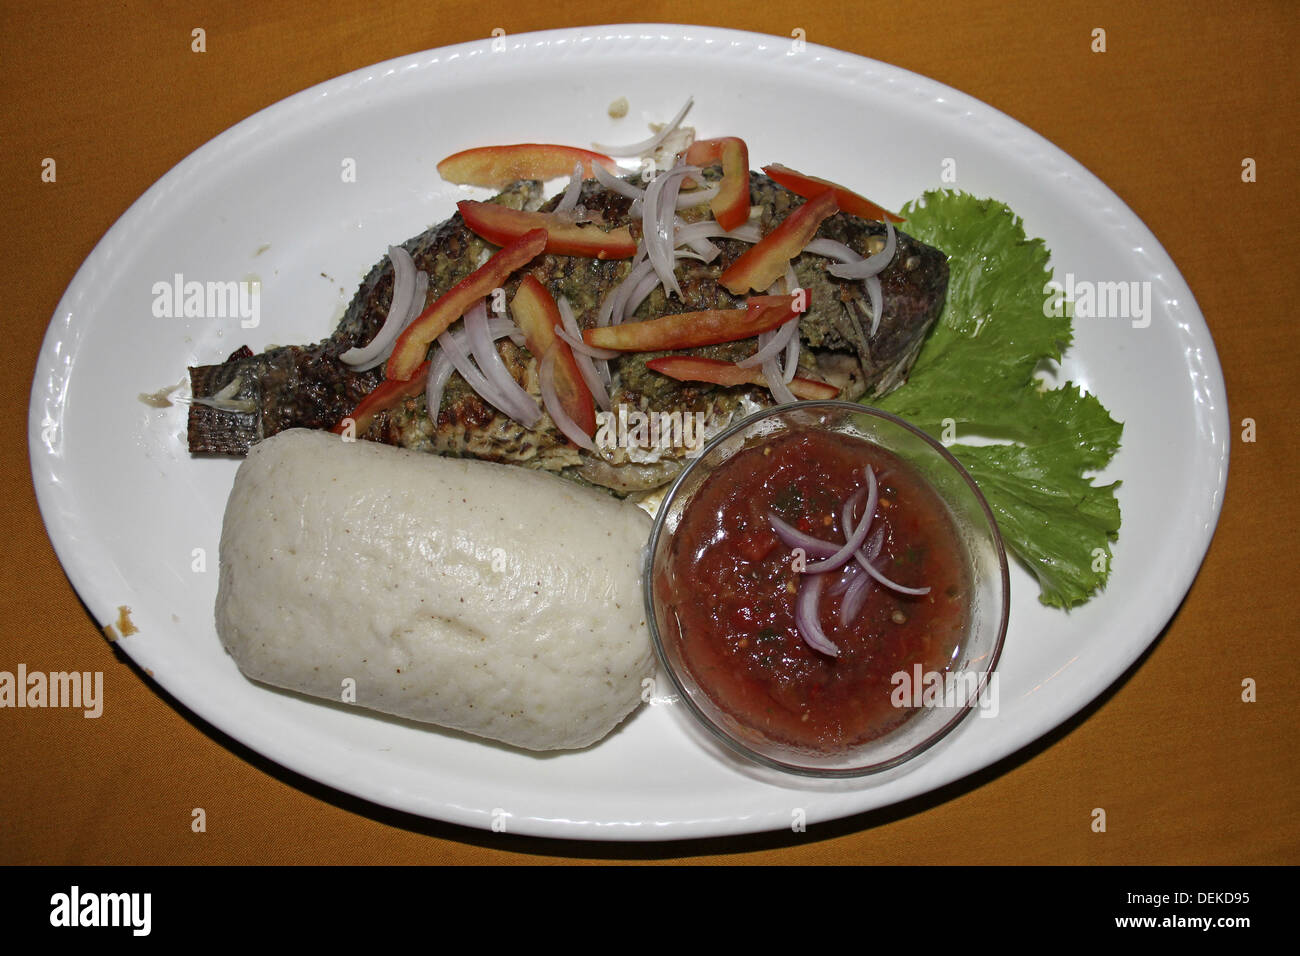 Typical Ghanaian Meal Of Tilapia And Banku (Fermented corn/cassava dough)  With Spicy Chili Sauce Stock Photo